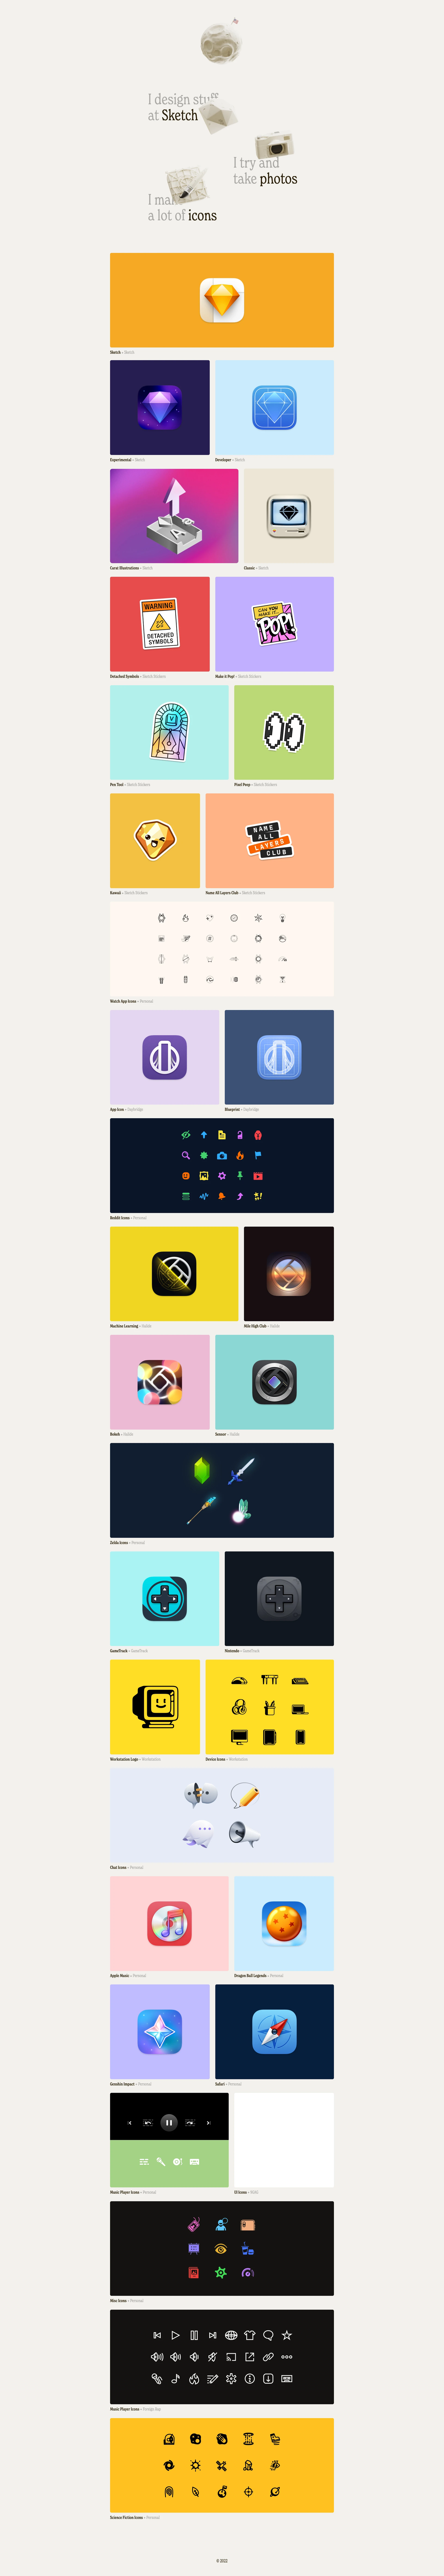 Moonbow Landing Page Example: I design stuff at Sketch. I try and take photos. I make a lot of icons.